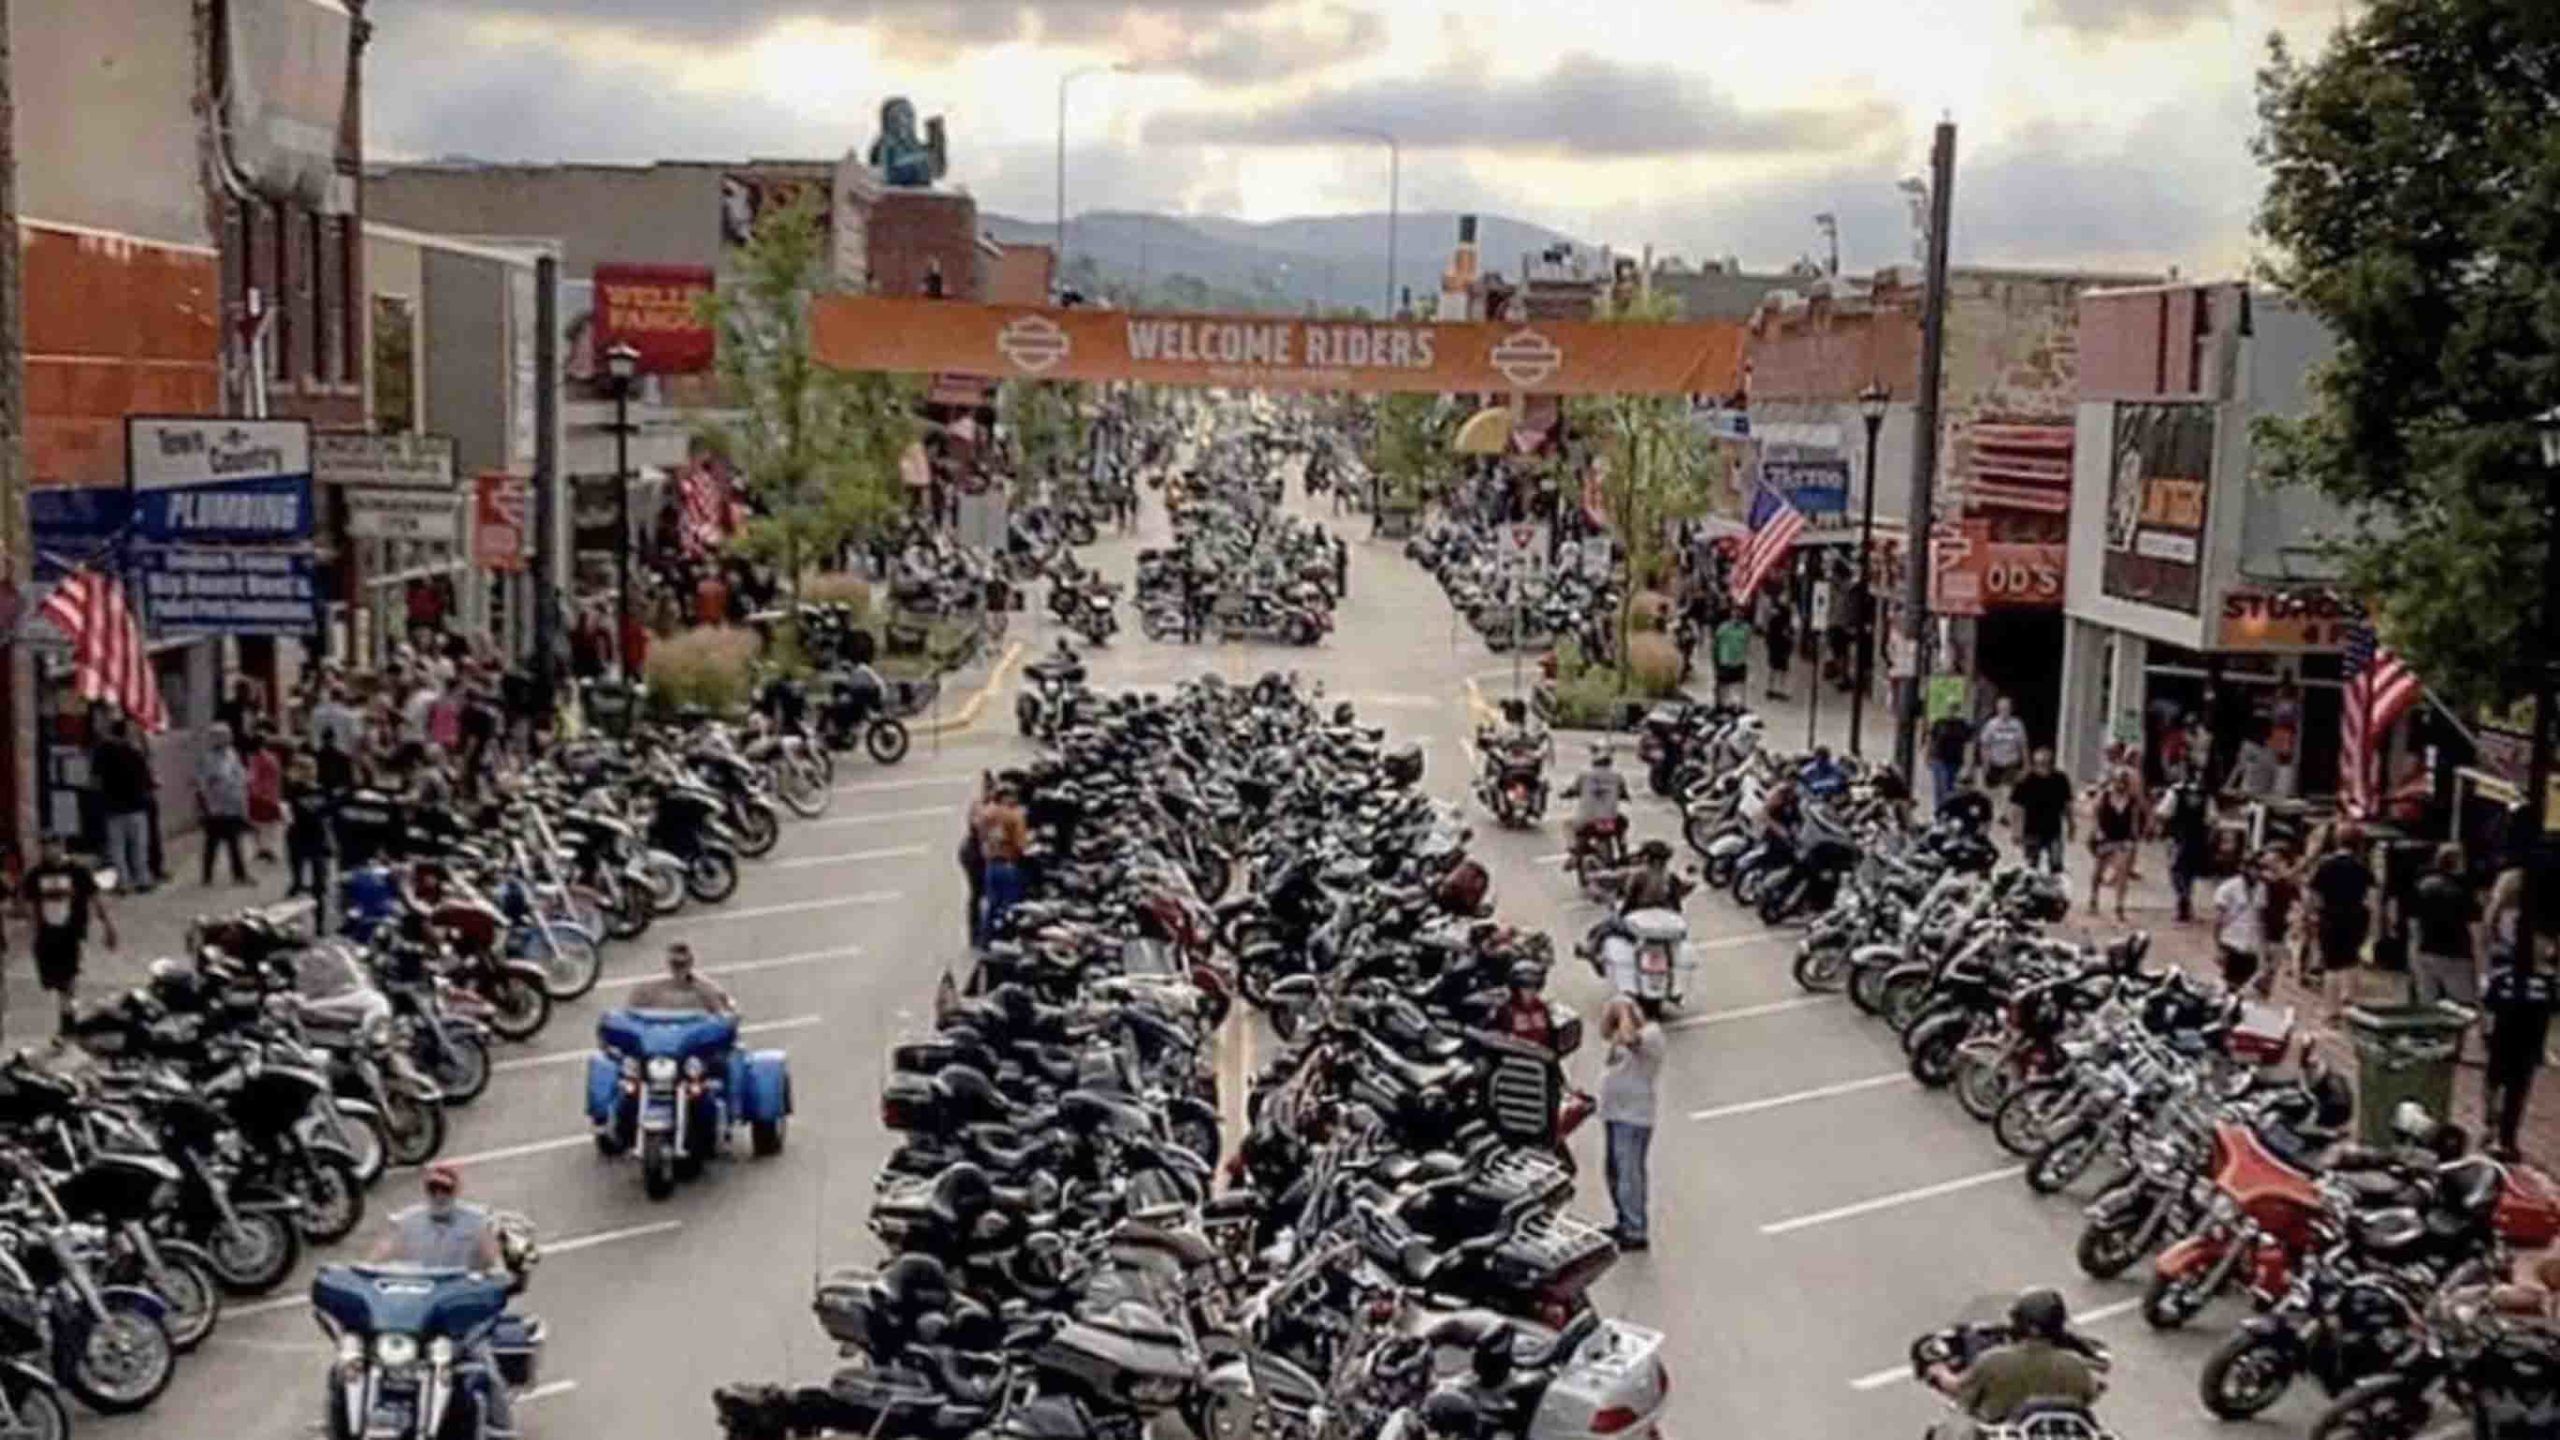 Sturgis Motorcycle Rally Allowed to Have Open Containers This Year. Cowboy State Daily